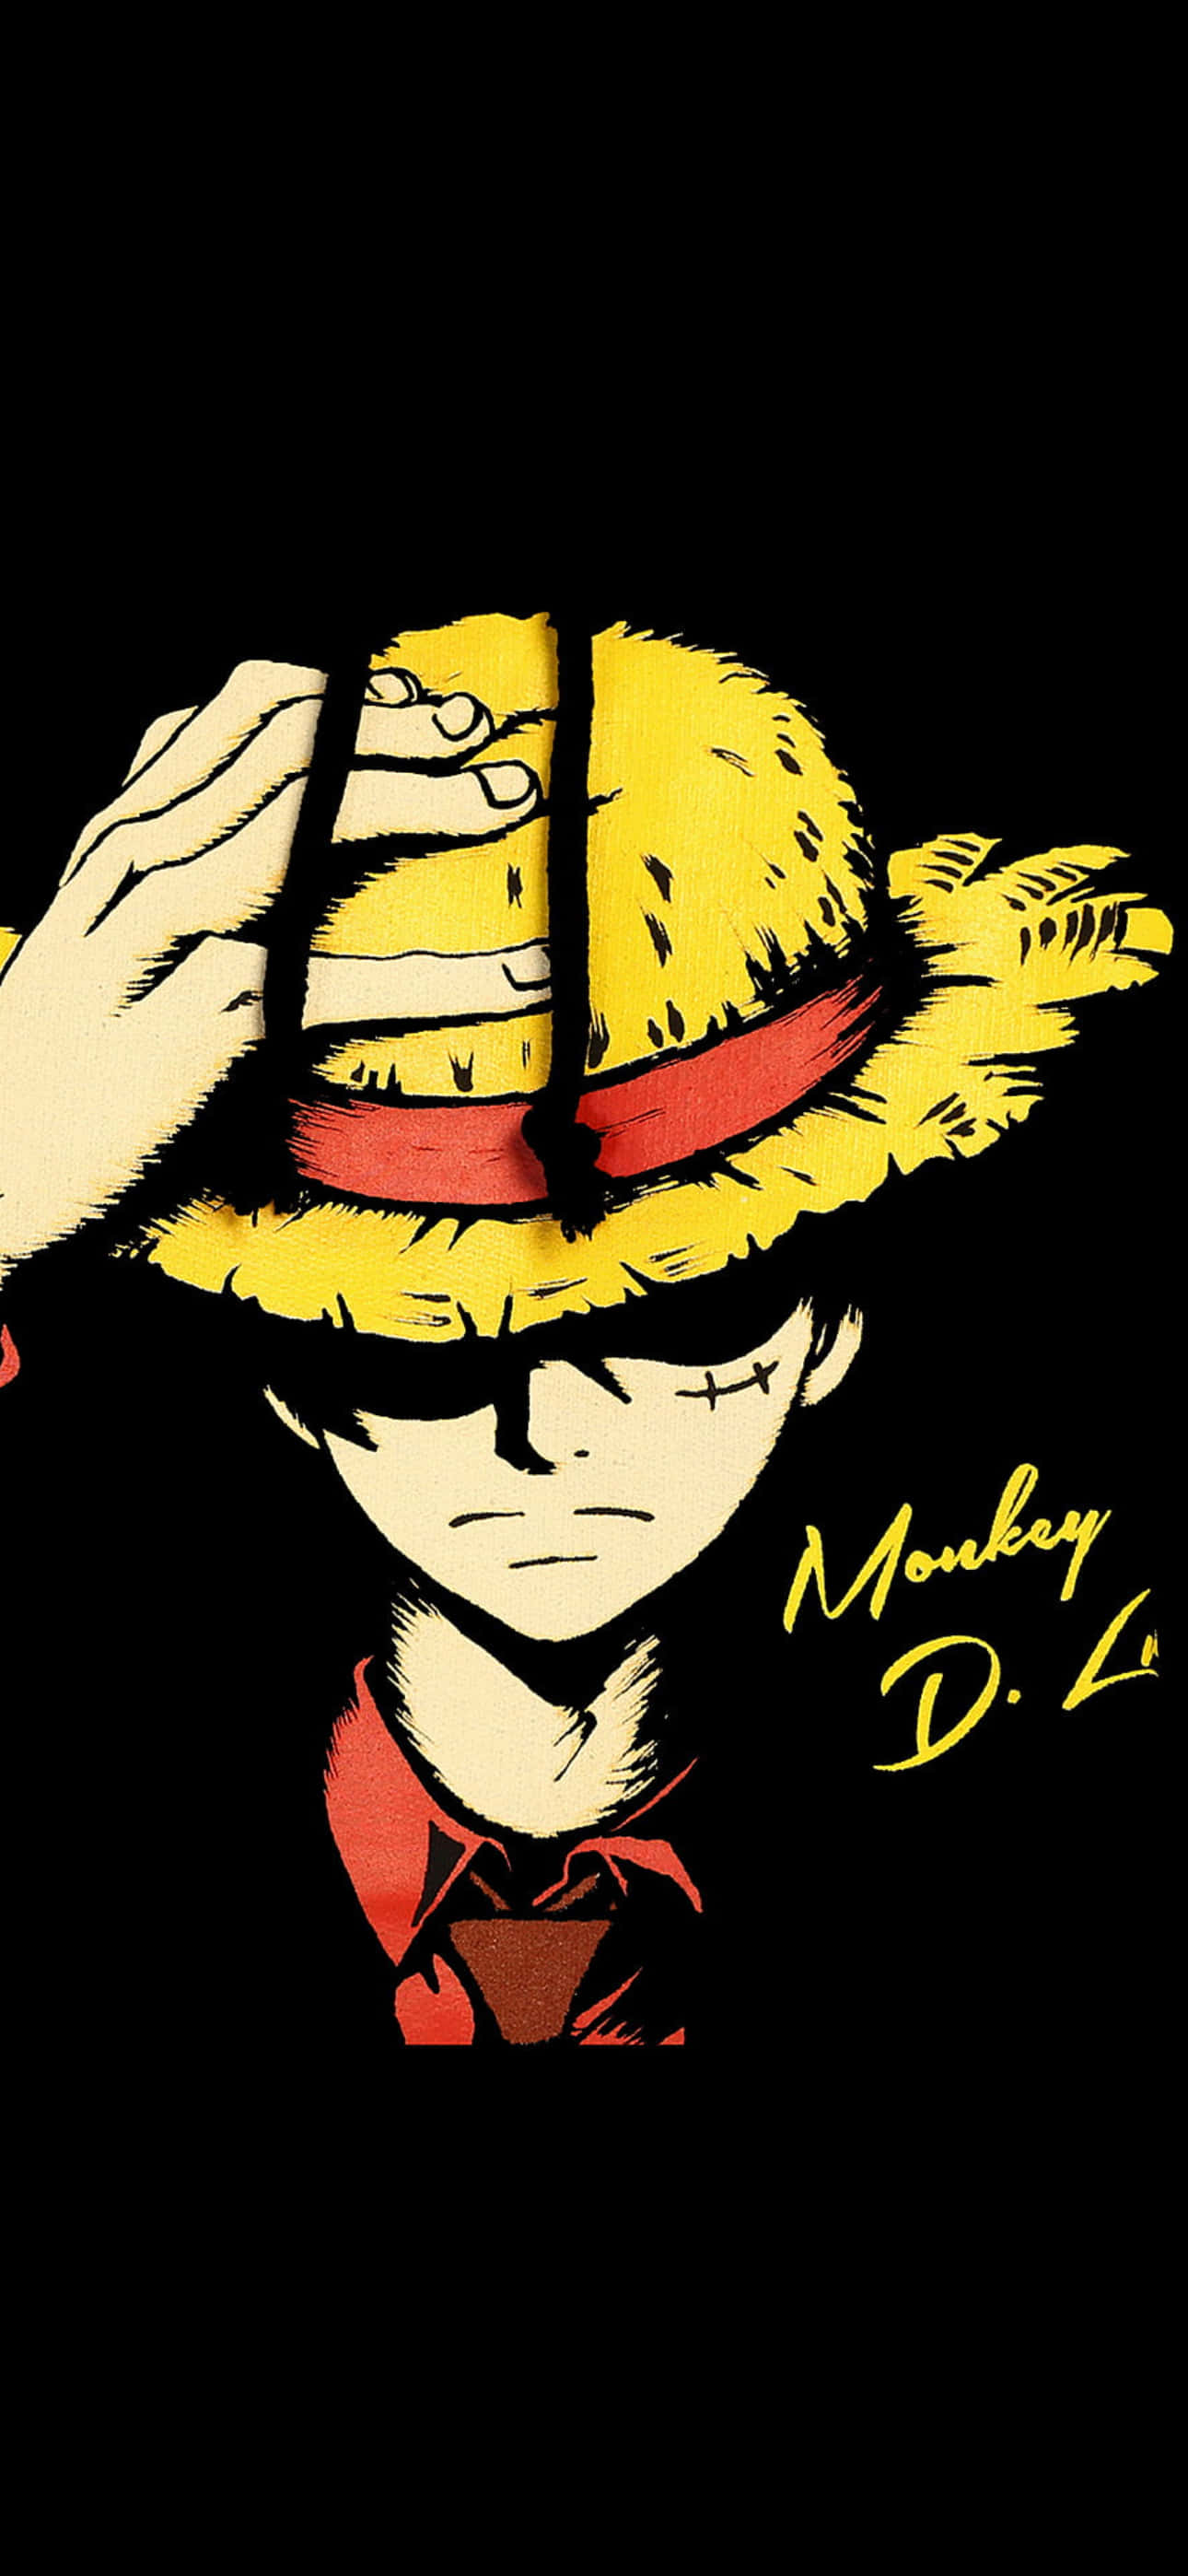 Download One Piece Luffy Iphone Wallpaper | Wallpapers.com